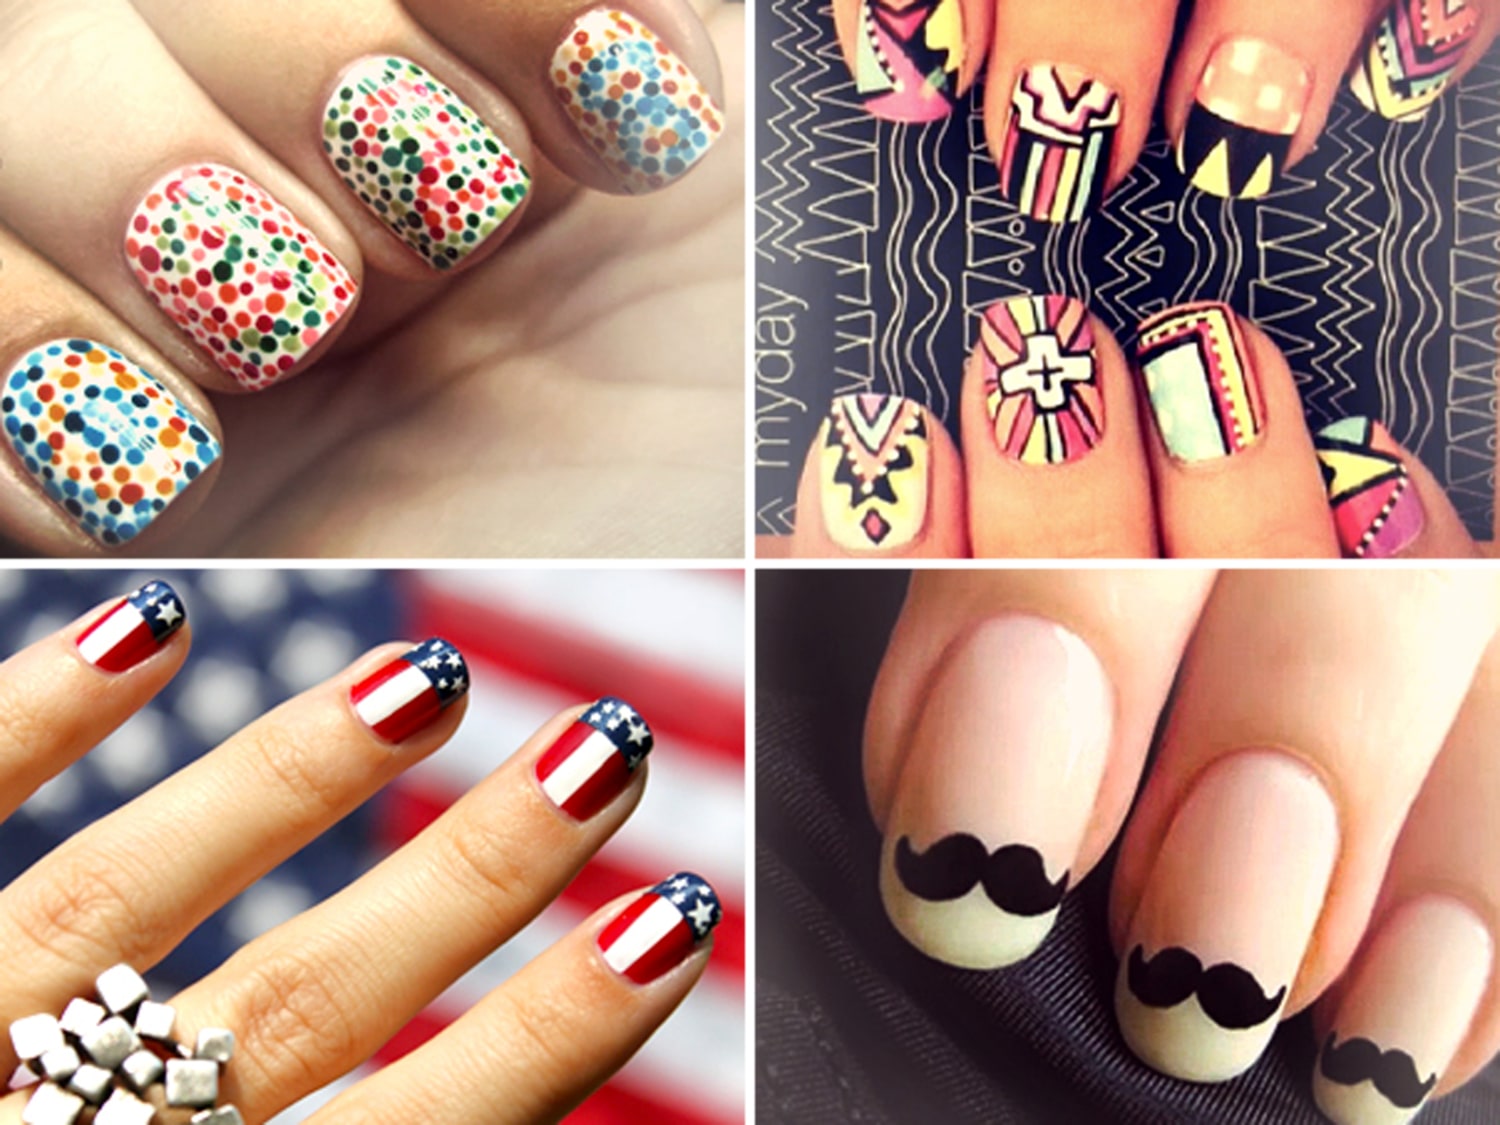 Latest nail art designs: - These nail art designs will make the traditional  look up-to-date